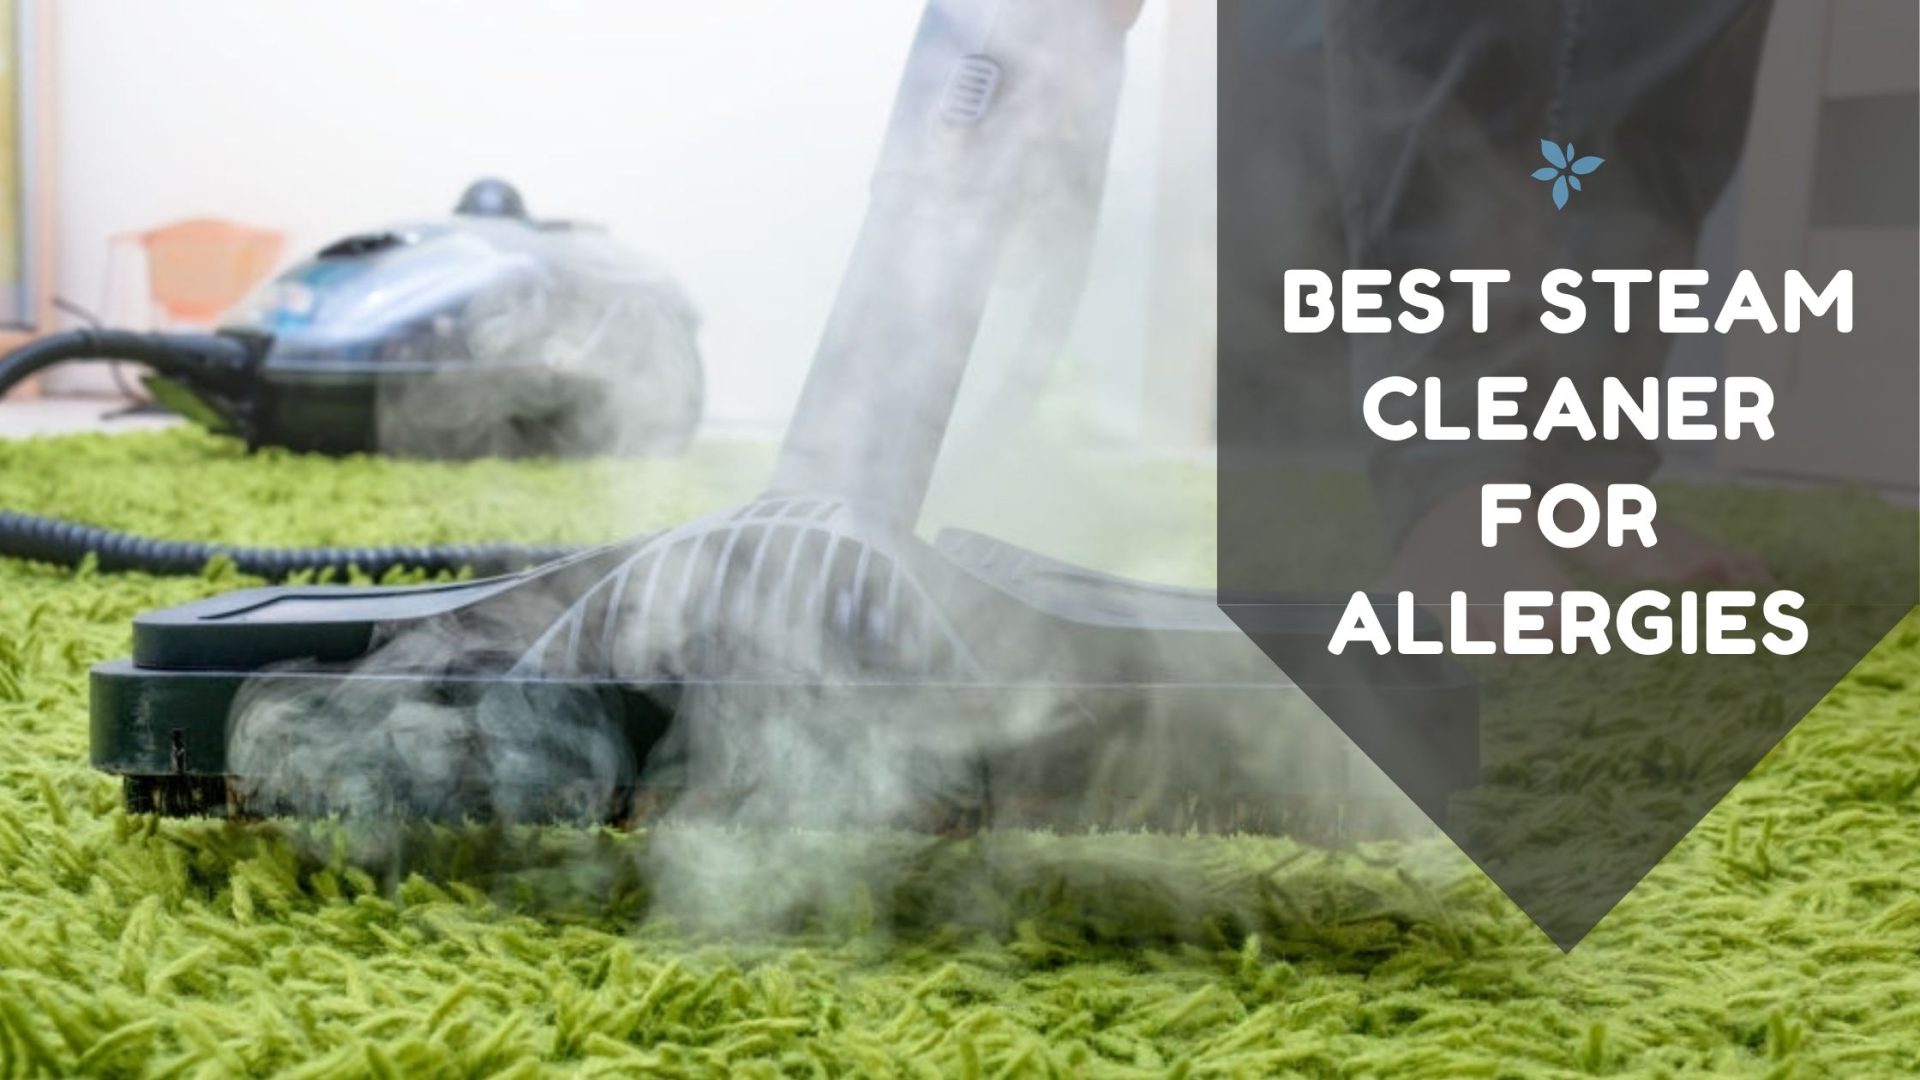 Best Steam Cleaner for Allergies